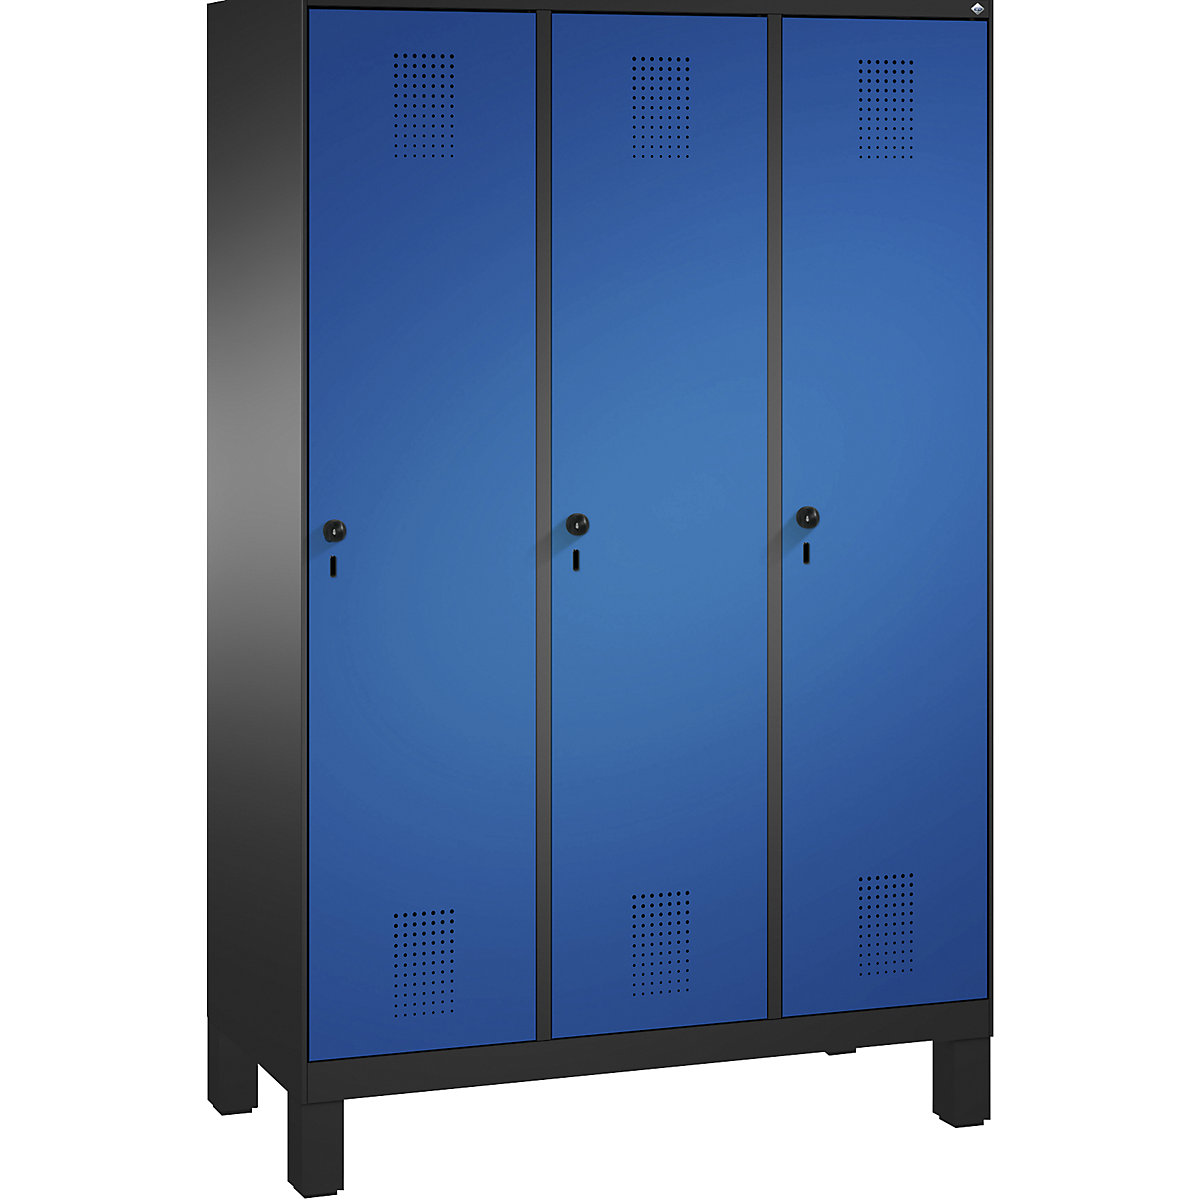 EVOLO cloakroom locker, with feet – C+P, 3 compartments, compartment width 400 mm, black grey / gentian blue-13